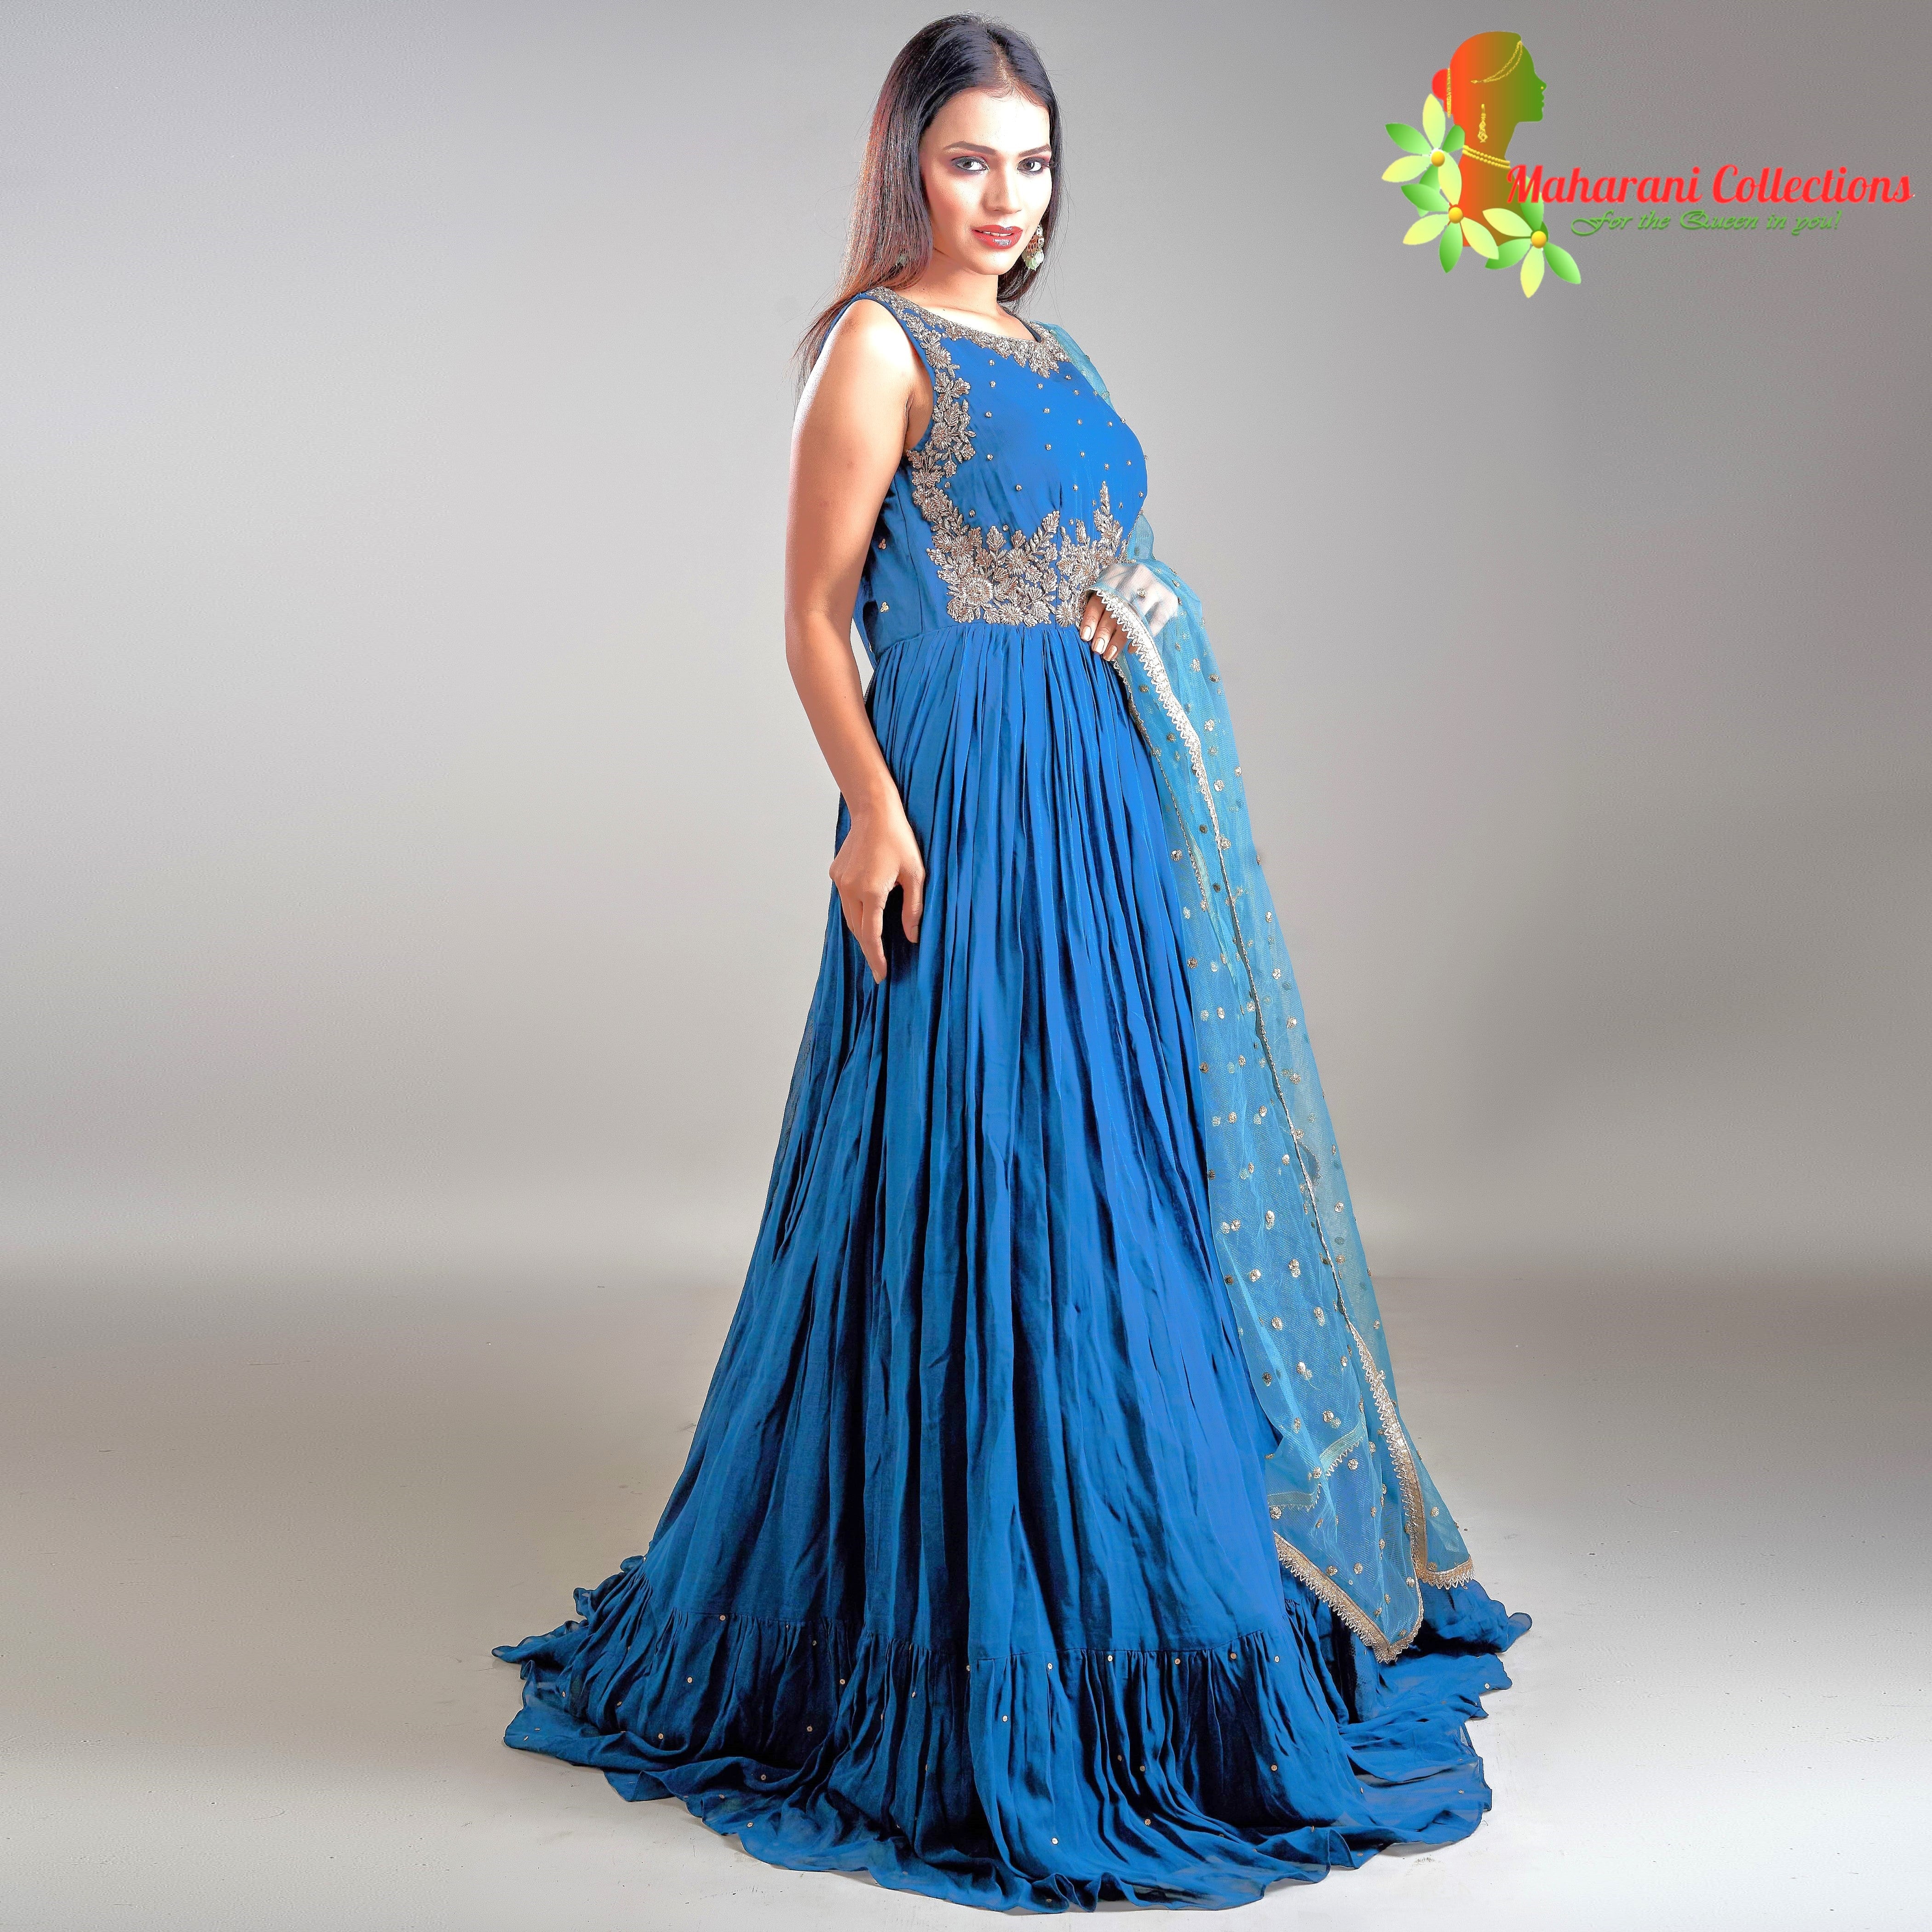 Maharani's Designer Ball (Princess) Gown - Peacock Blue with Heavy Gol –  Maharani Collections